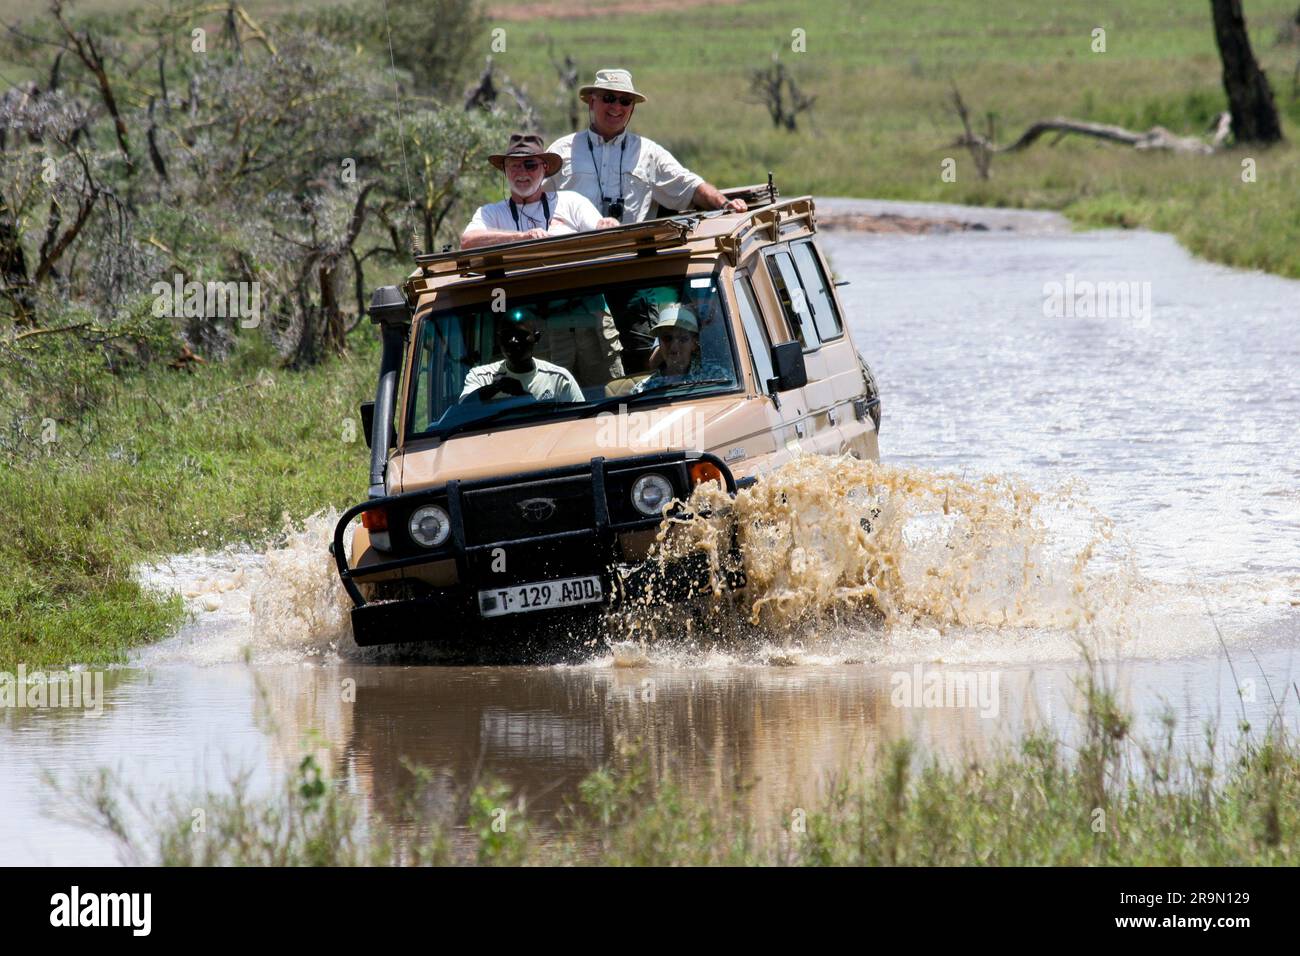 Africa, Tanzania, Serengeti National Park, Safari tourists in an open top land rover crossing a water barrier Stock Photo